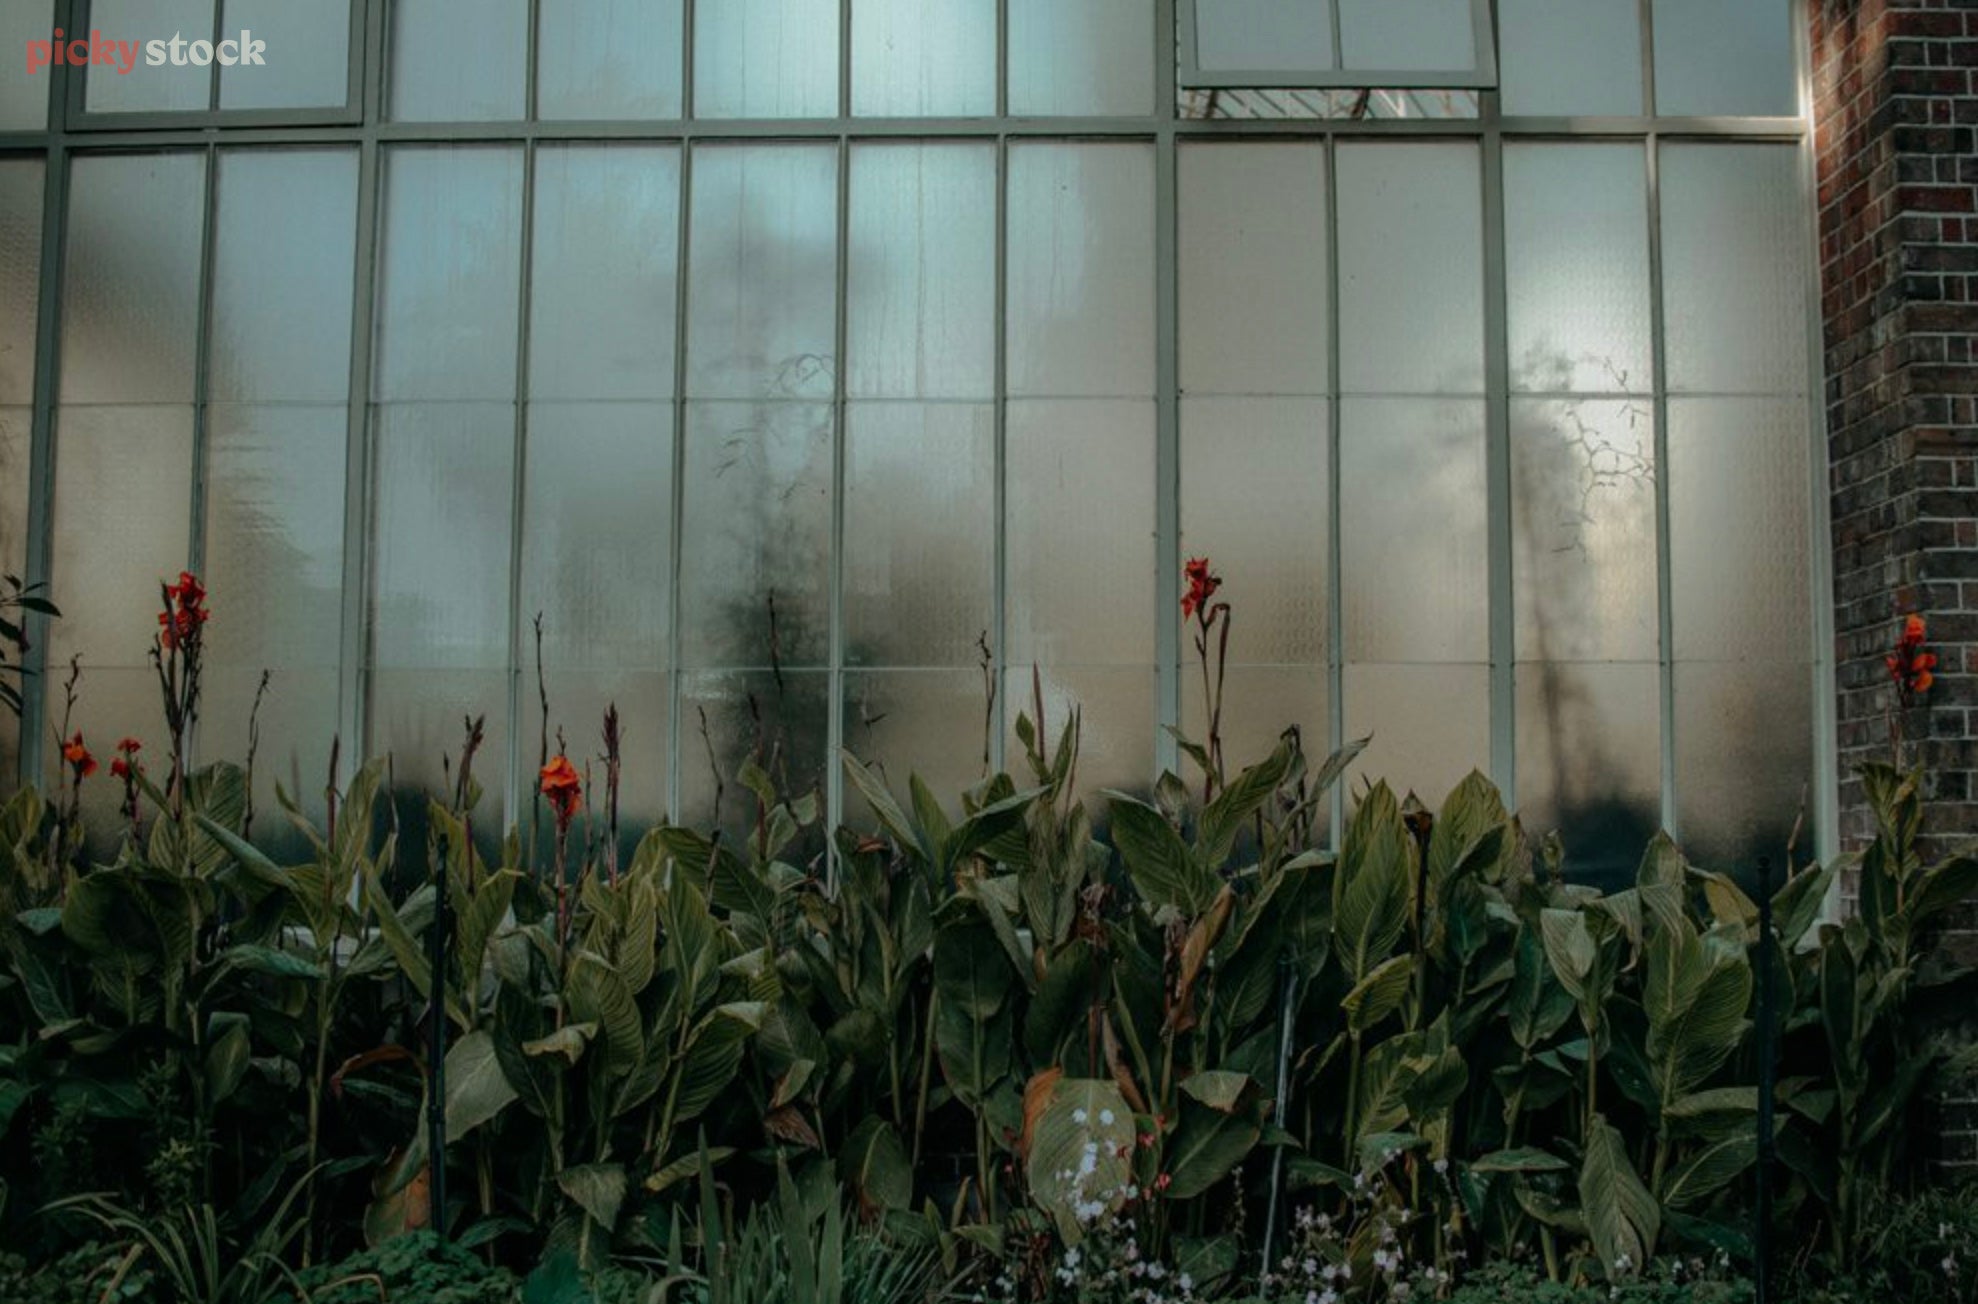 Canna Lillies line the inside of the Auckland Domain Wintergardens, the heat fogging up the large glasshouse windows. 